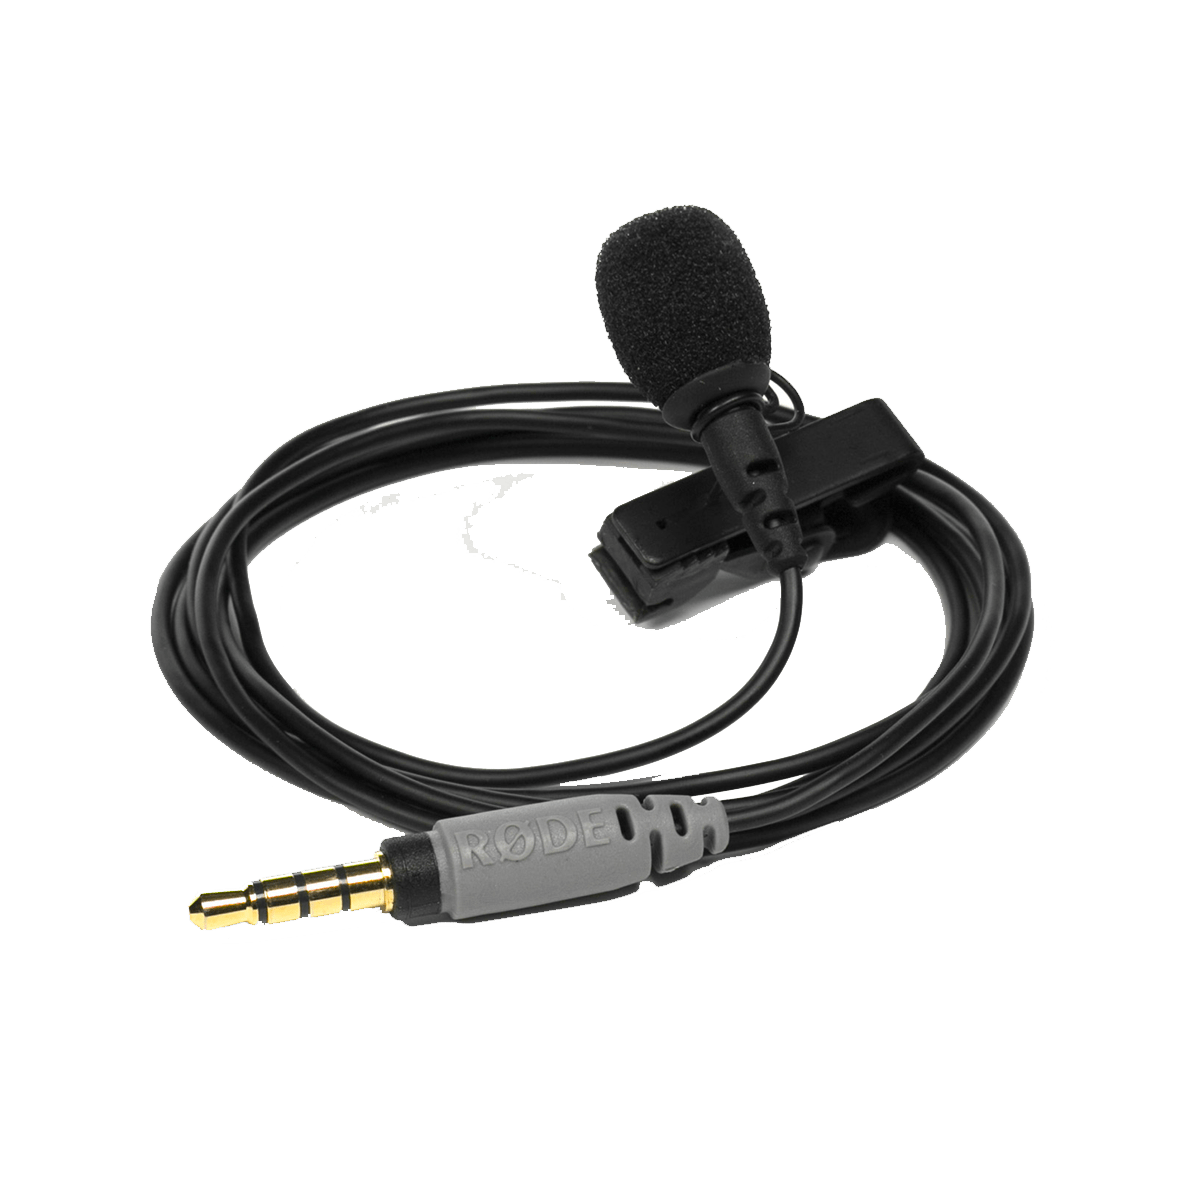 Rode Recording Rode SmartLav+ Lavalier Microphone Lapel for Smart Phone - Byron Music